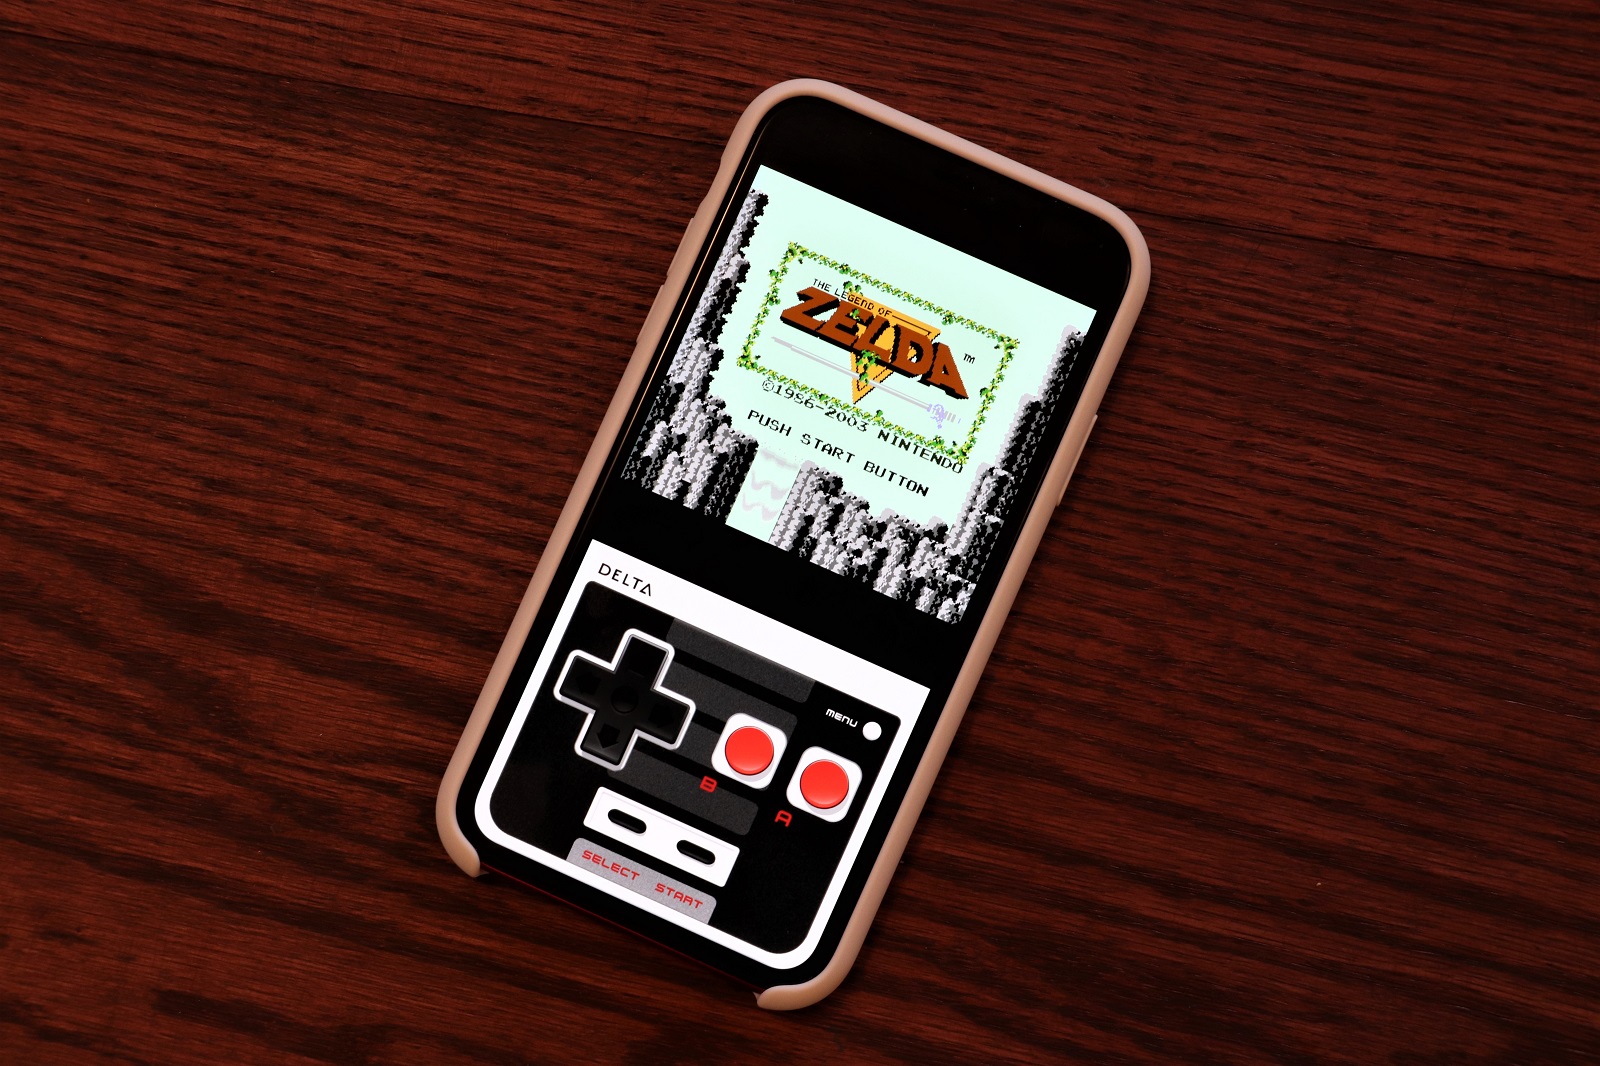 Alternative Ios App Store Brings Emulators And More To Iphone Without A Jailbreak